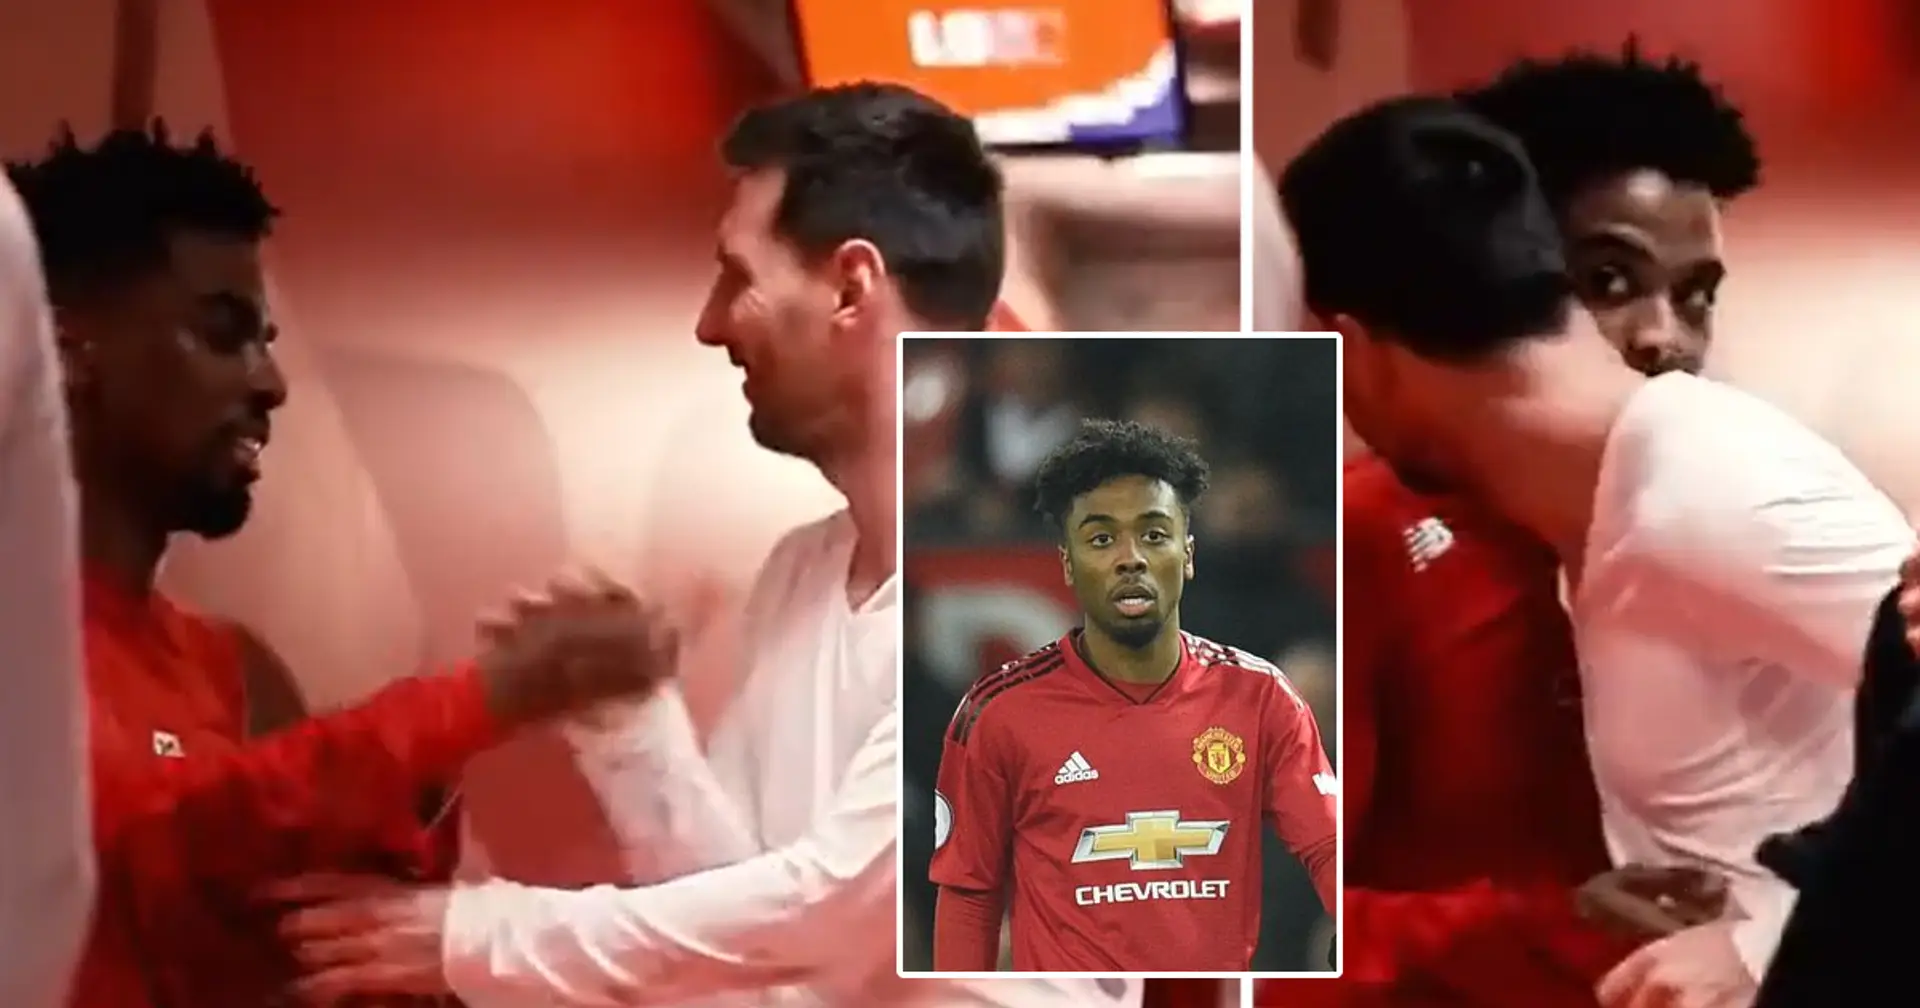 Angel Gomes approached by Leo Messi for shirt swap, Gomes was compared to Messi back in Man United academy